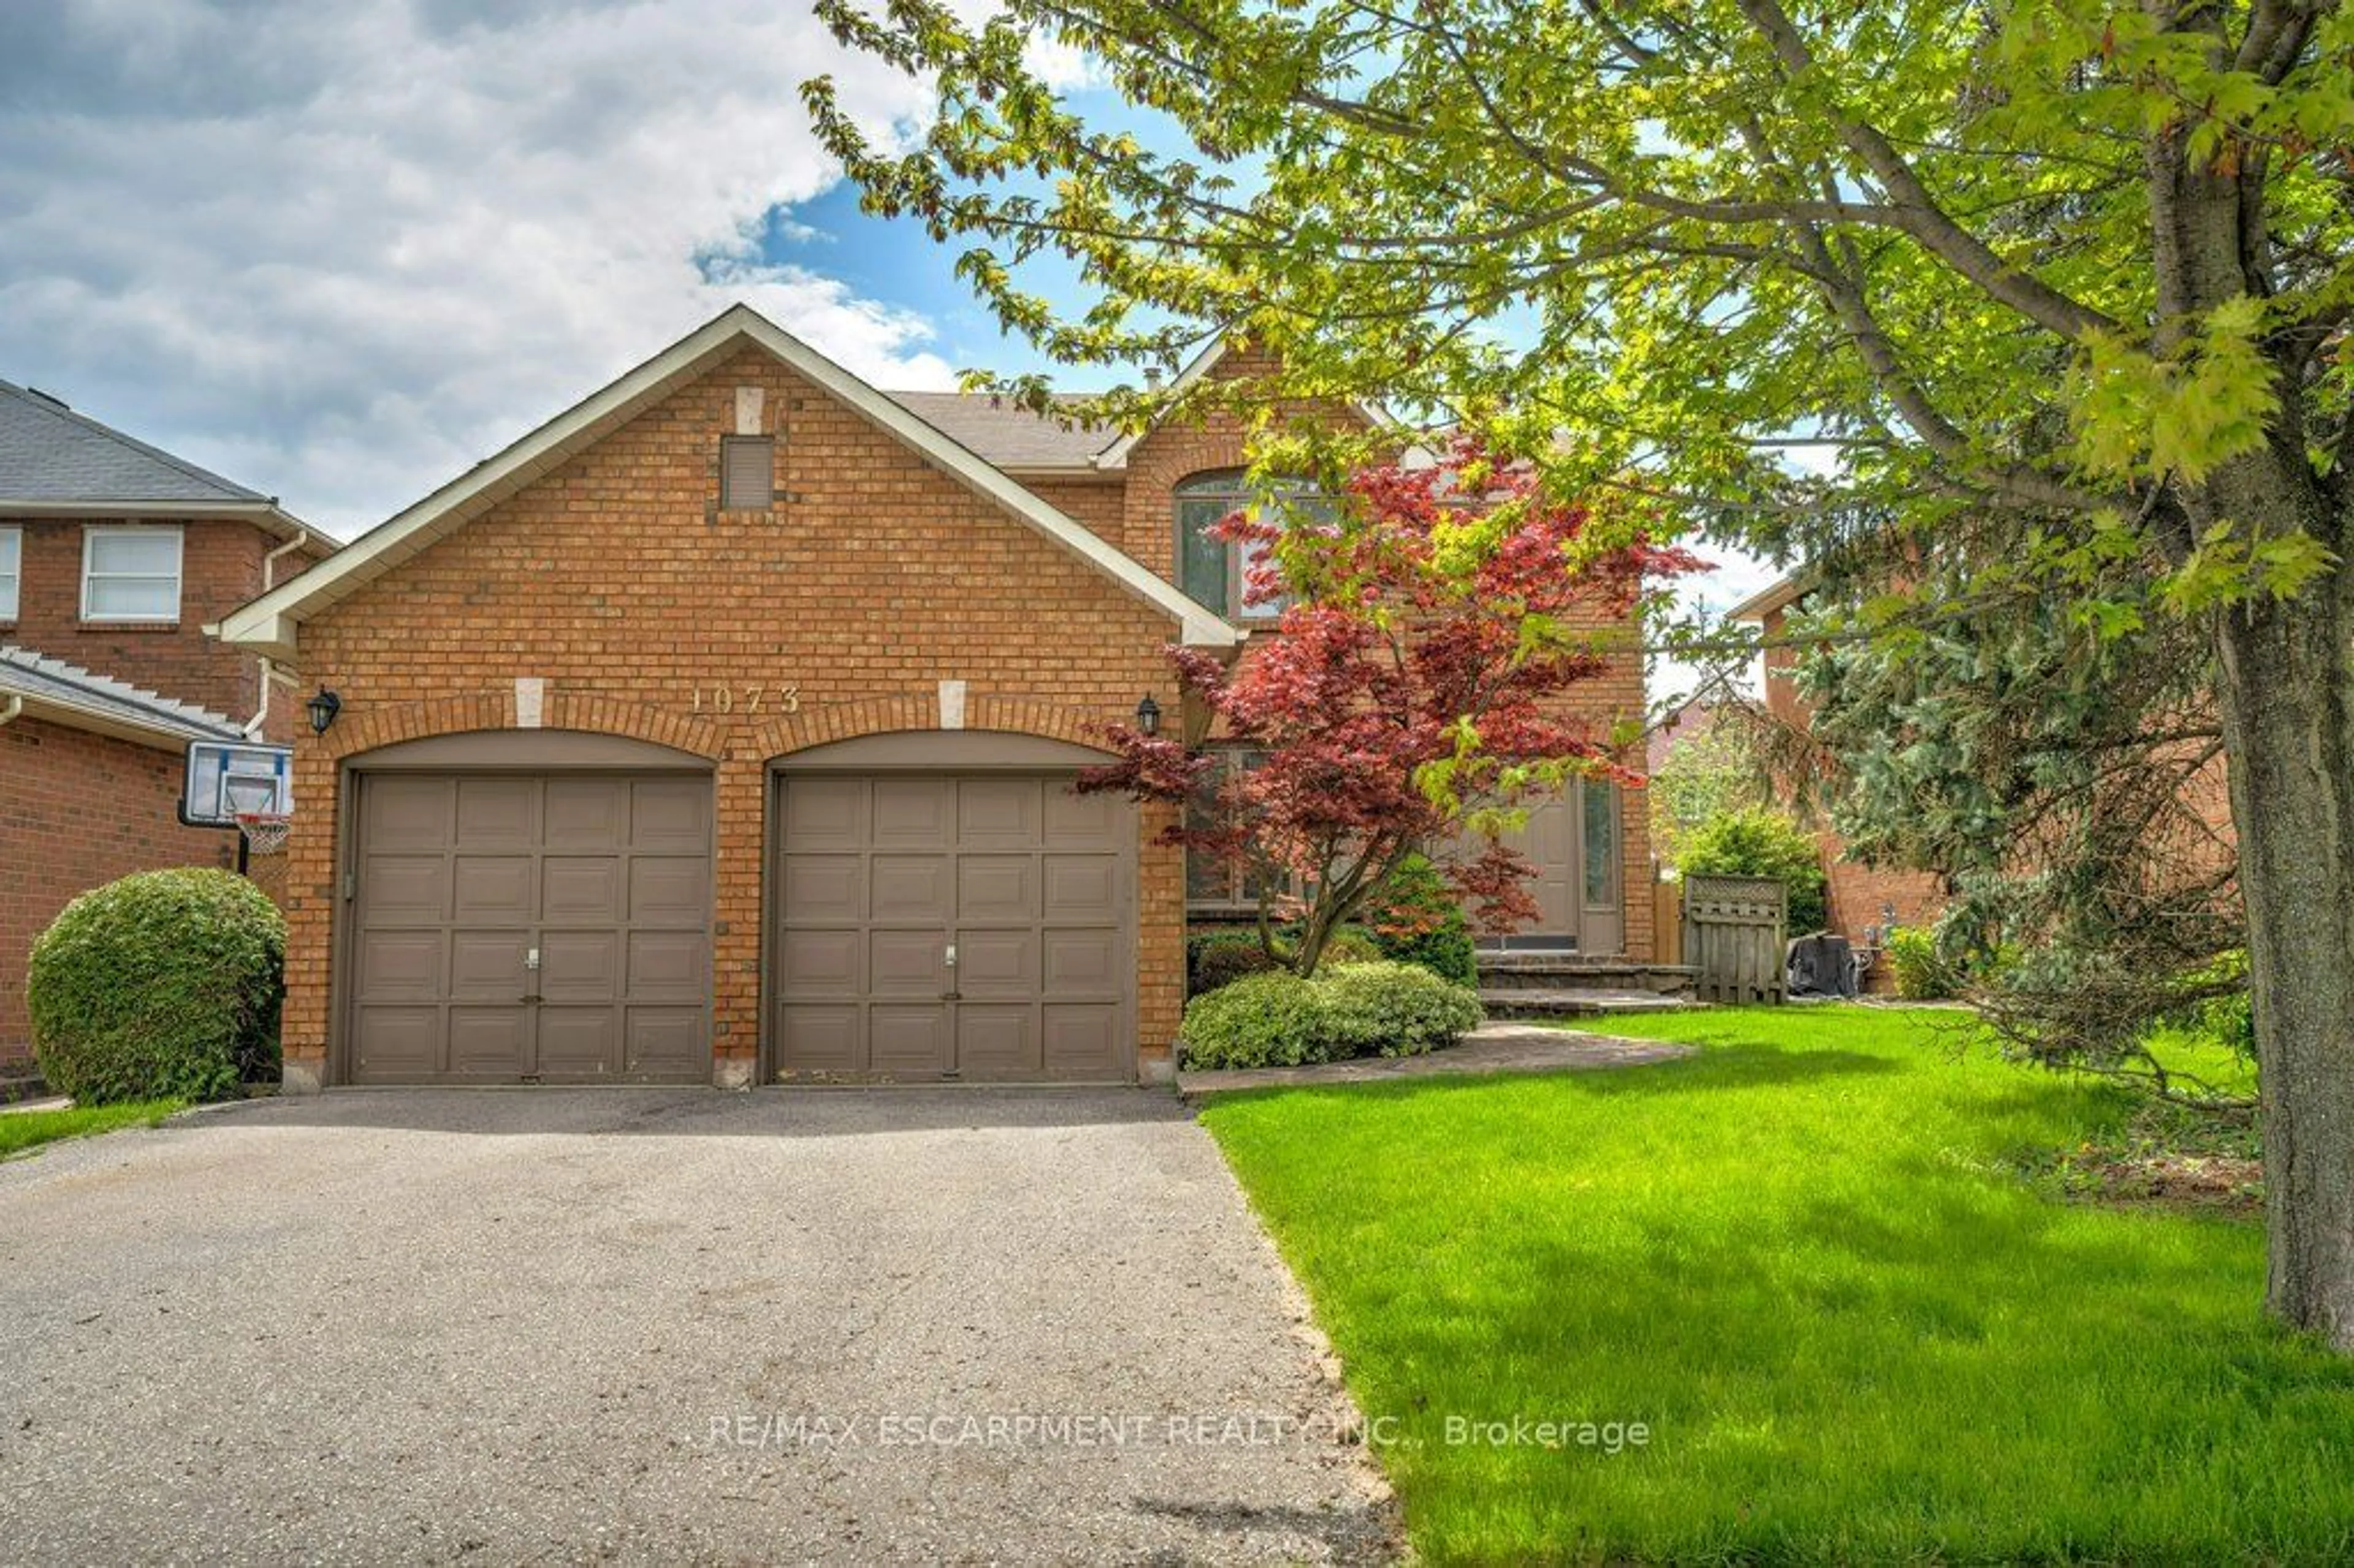 Home with brick exterior material for 1073 Grandeur Cres, Oakville Ontario L6H 4B6